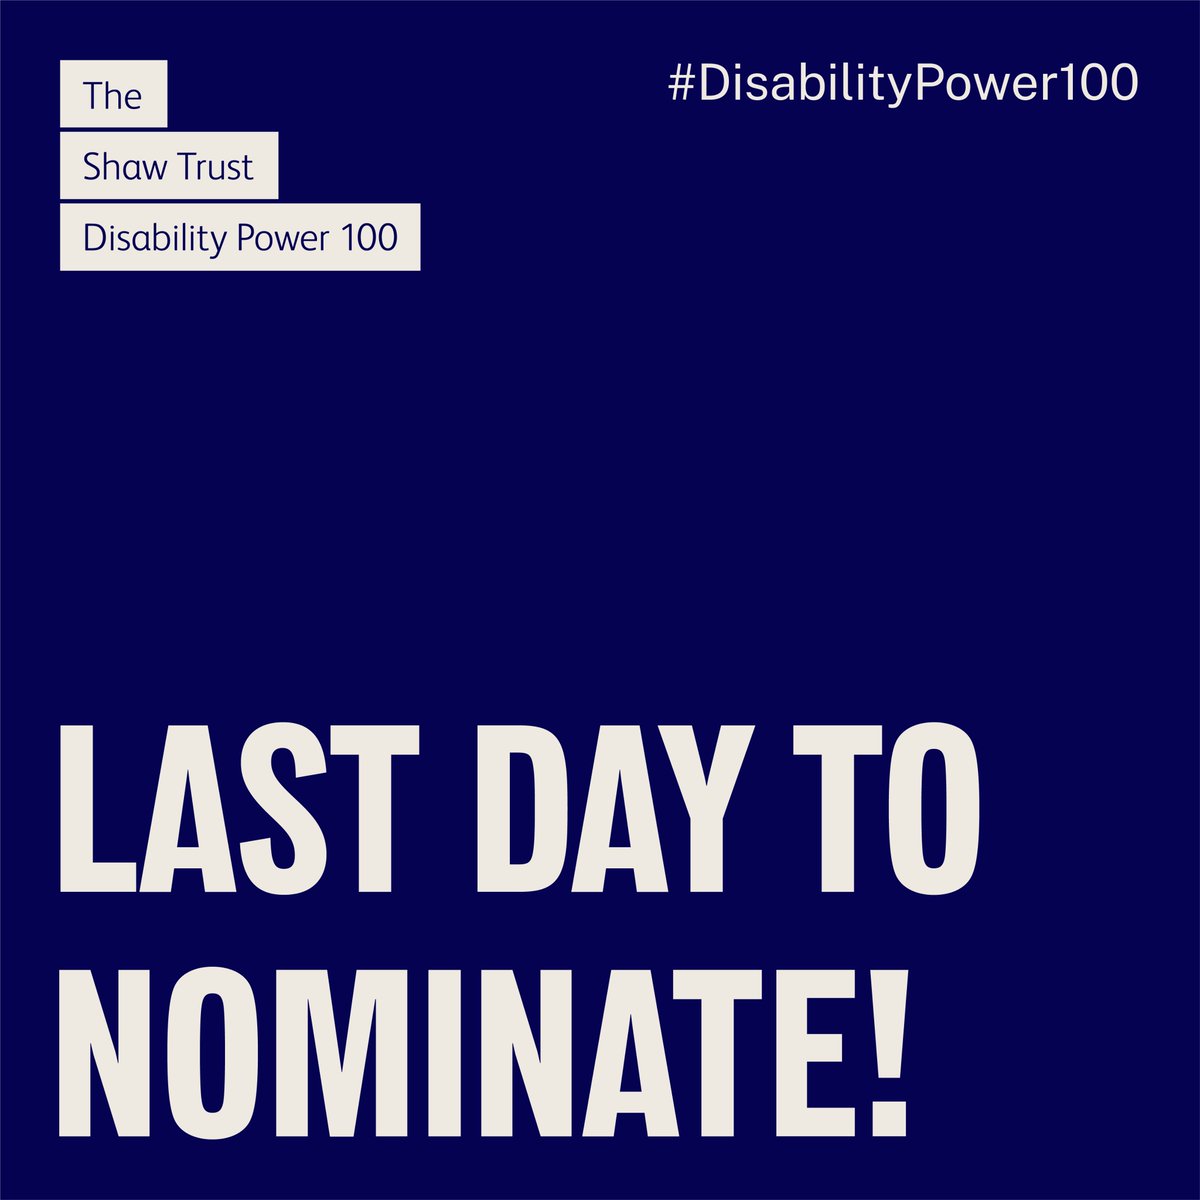 The #DisabilityPower100 is a platform for change, recognising the most influential disabled people in the UK. It celebrates their ambition and achievements, and provides encouragement to the leaders of tomorrow. Be part of the change. Nominate now: bit.ly/3Vg8gz1